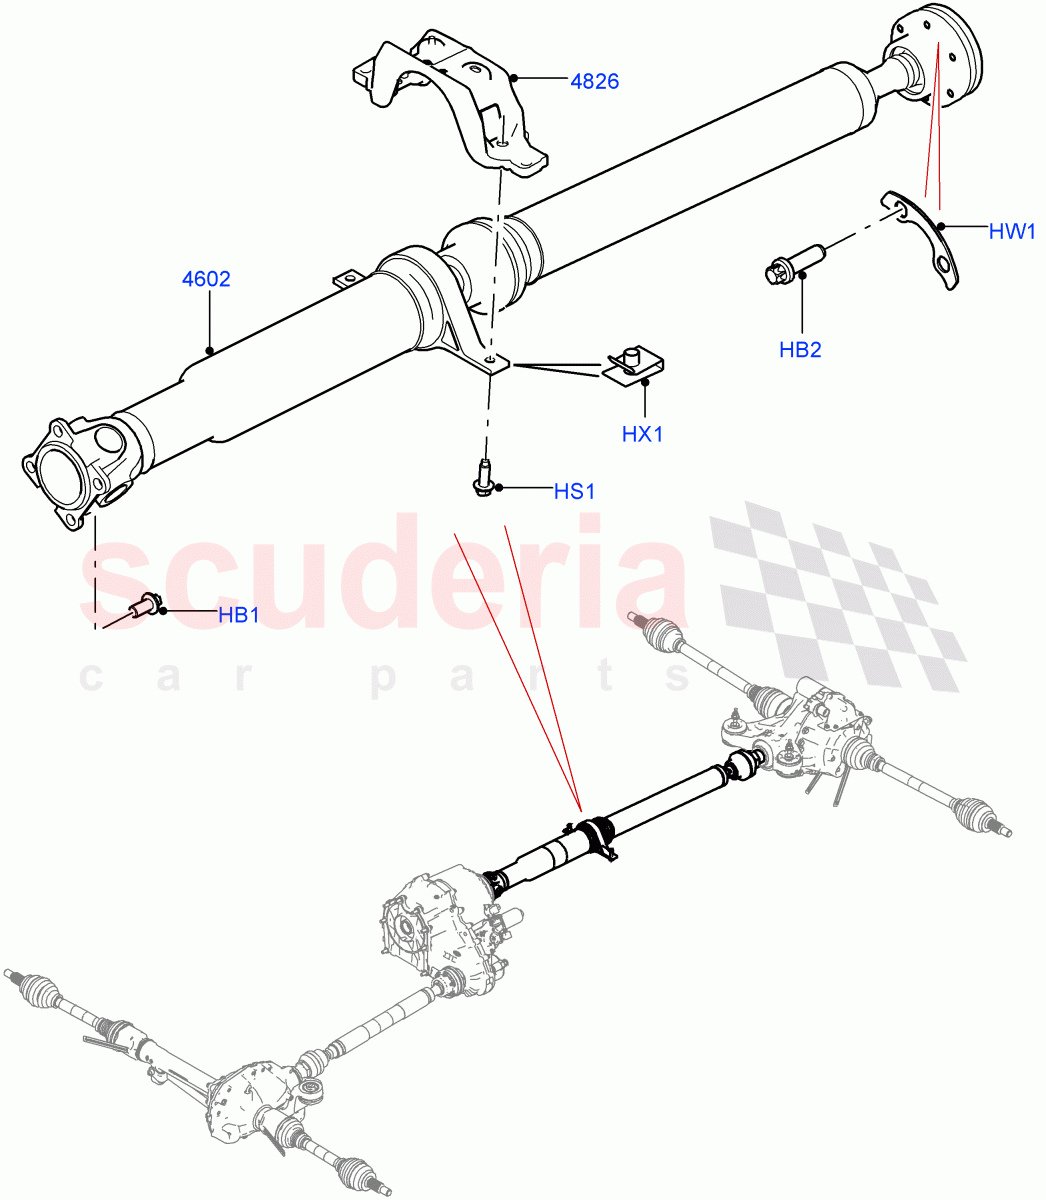 Drive Shaft - Rear Axle Drive(Propshaft, Nitra Plant Build)((V)FROMK2000001,(V)TOL2999999) of Land Rover Land Rover Discovery 5 (2017+) [2.0 Turbo Diesel]